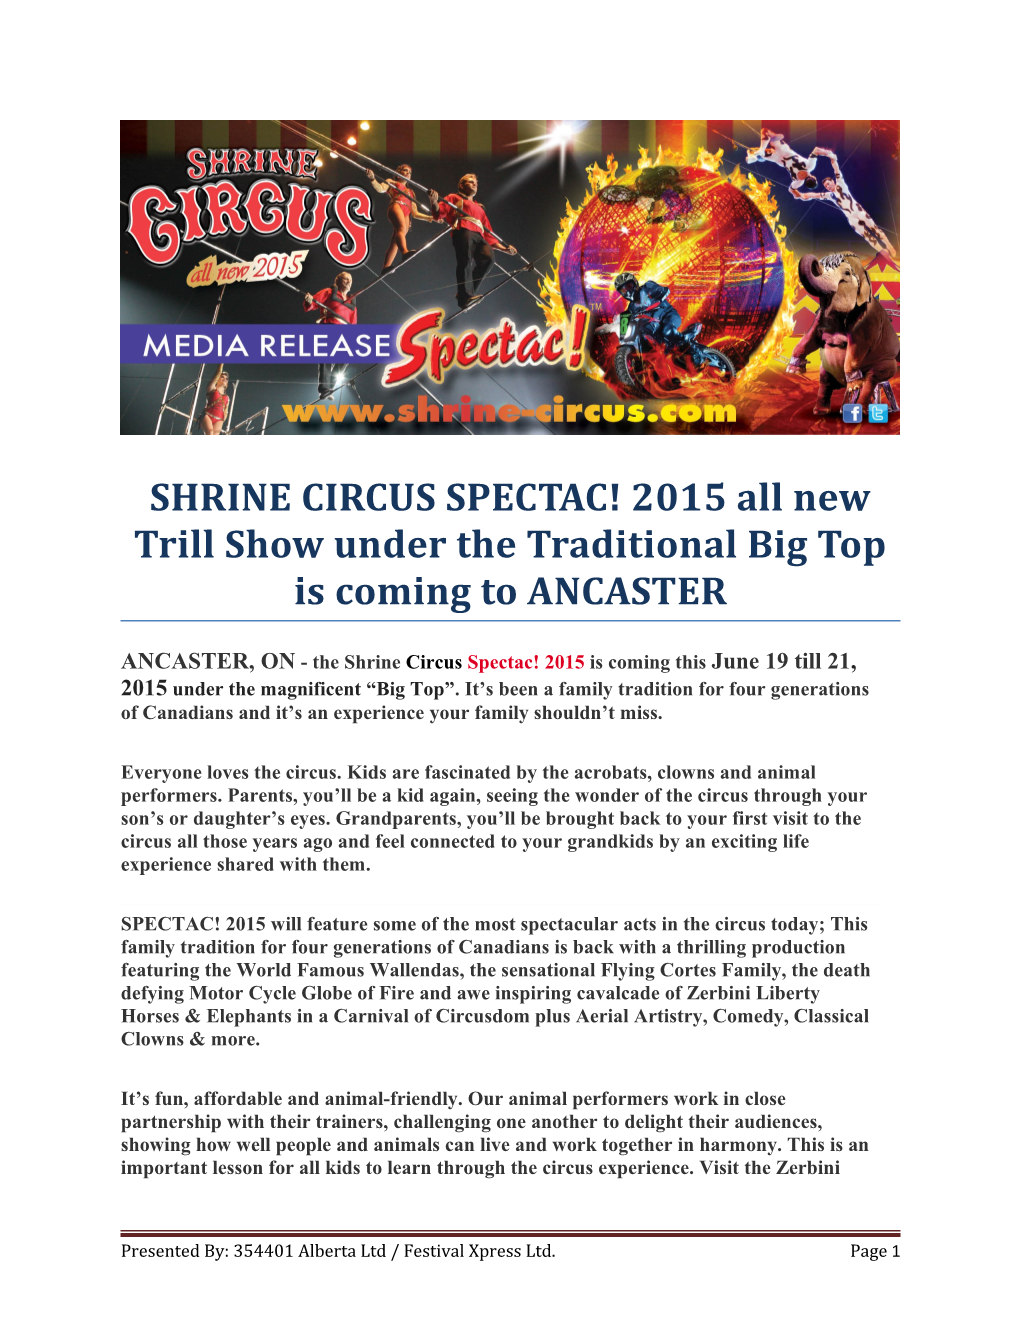 SHRINE CIRCUS SPECTAC! 2015 All New Trill Show Under the Traditional Big Top Is Coming